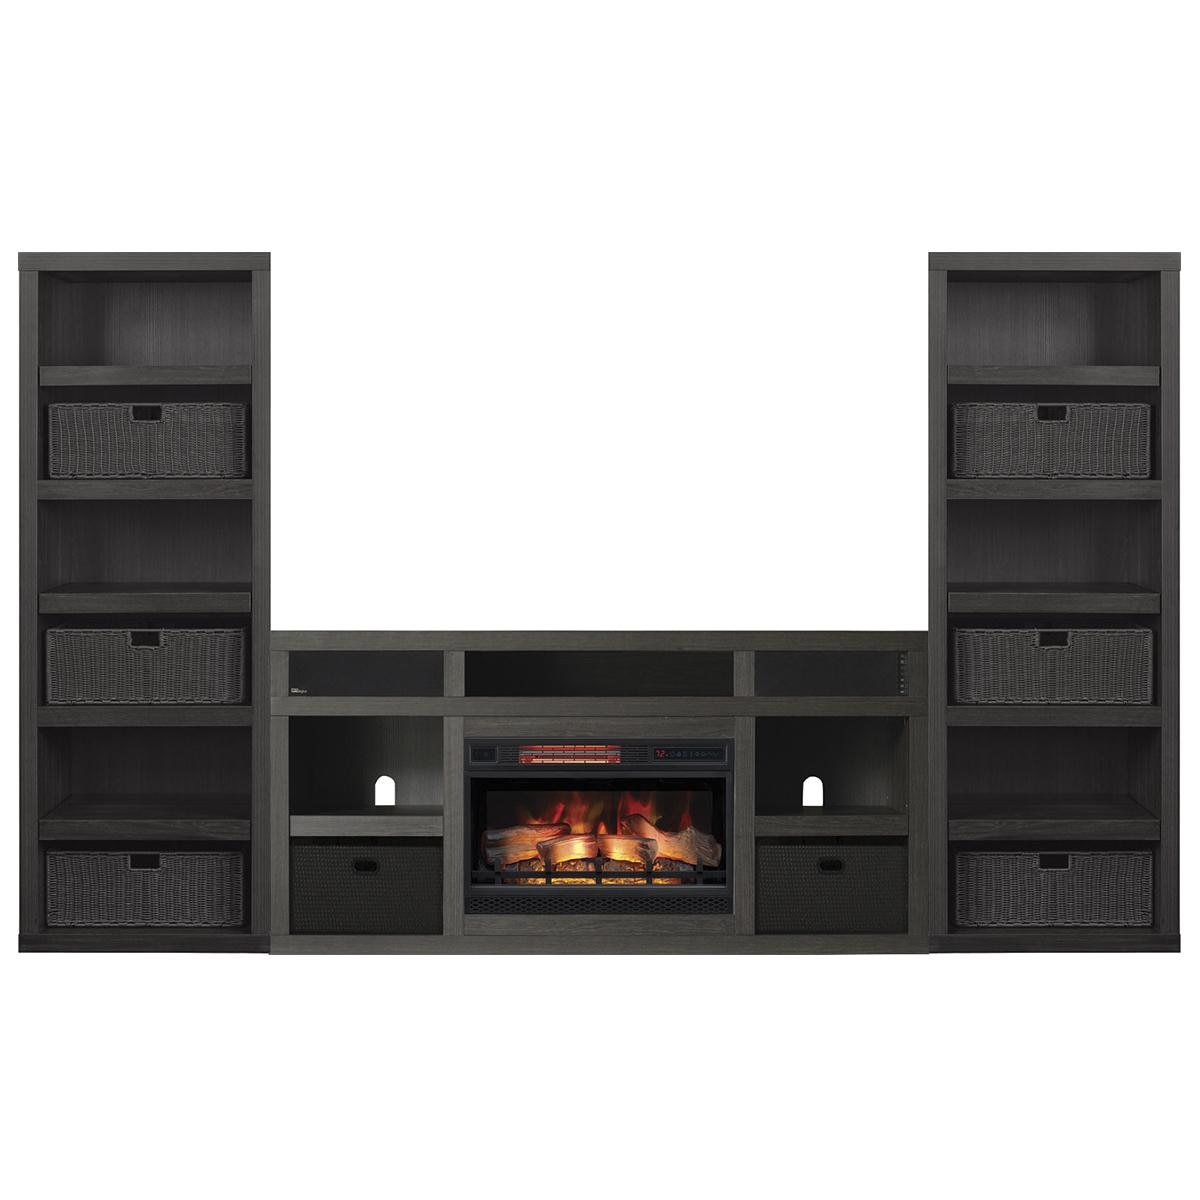 Infrared Fireplace Heater Tv Stand Unique Fabio Flames Greatlin 3 Piece Fireplace Entertainment Wall